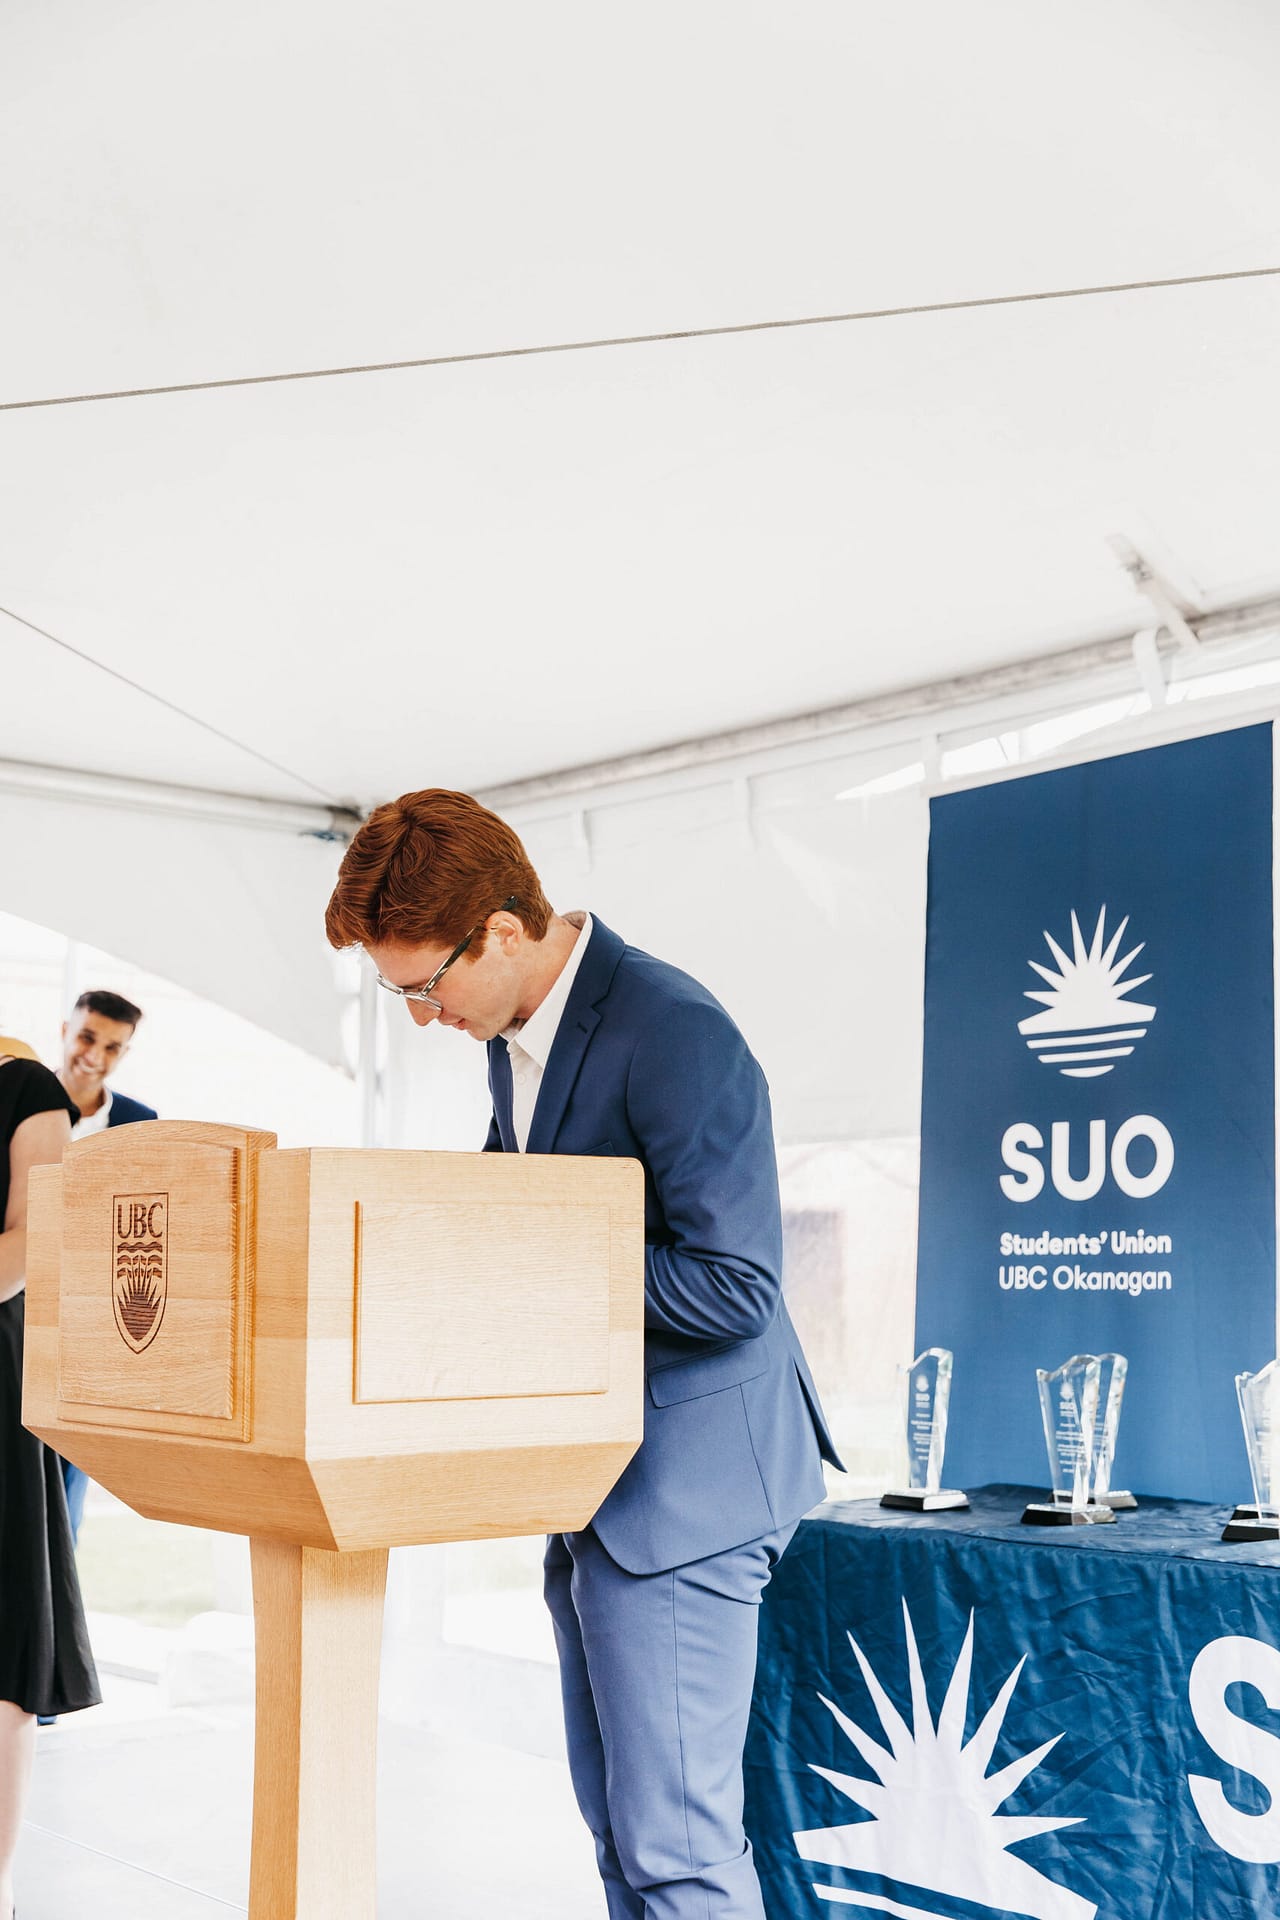 SUO Statement on UBC Tuition Increase 2022/23